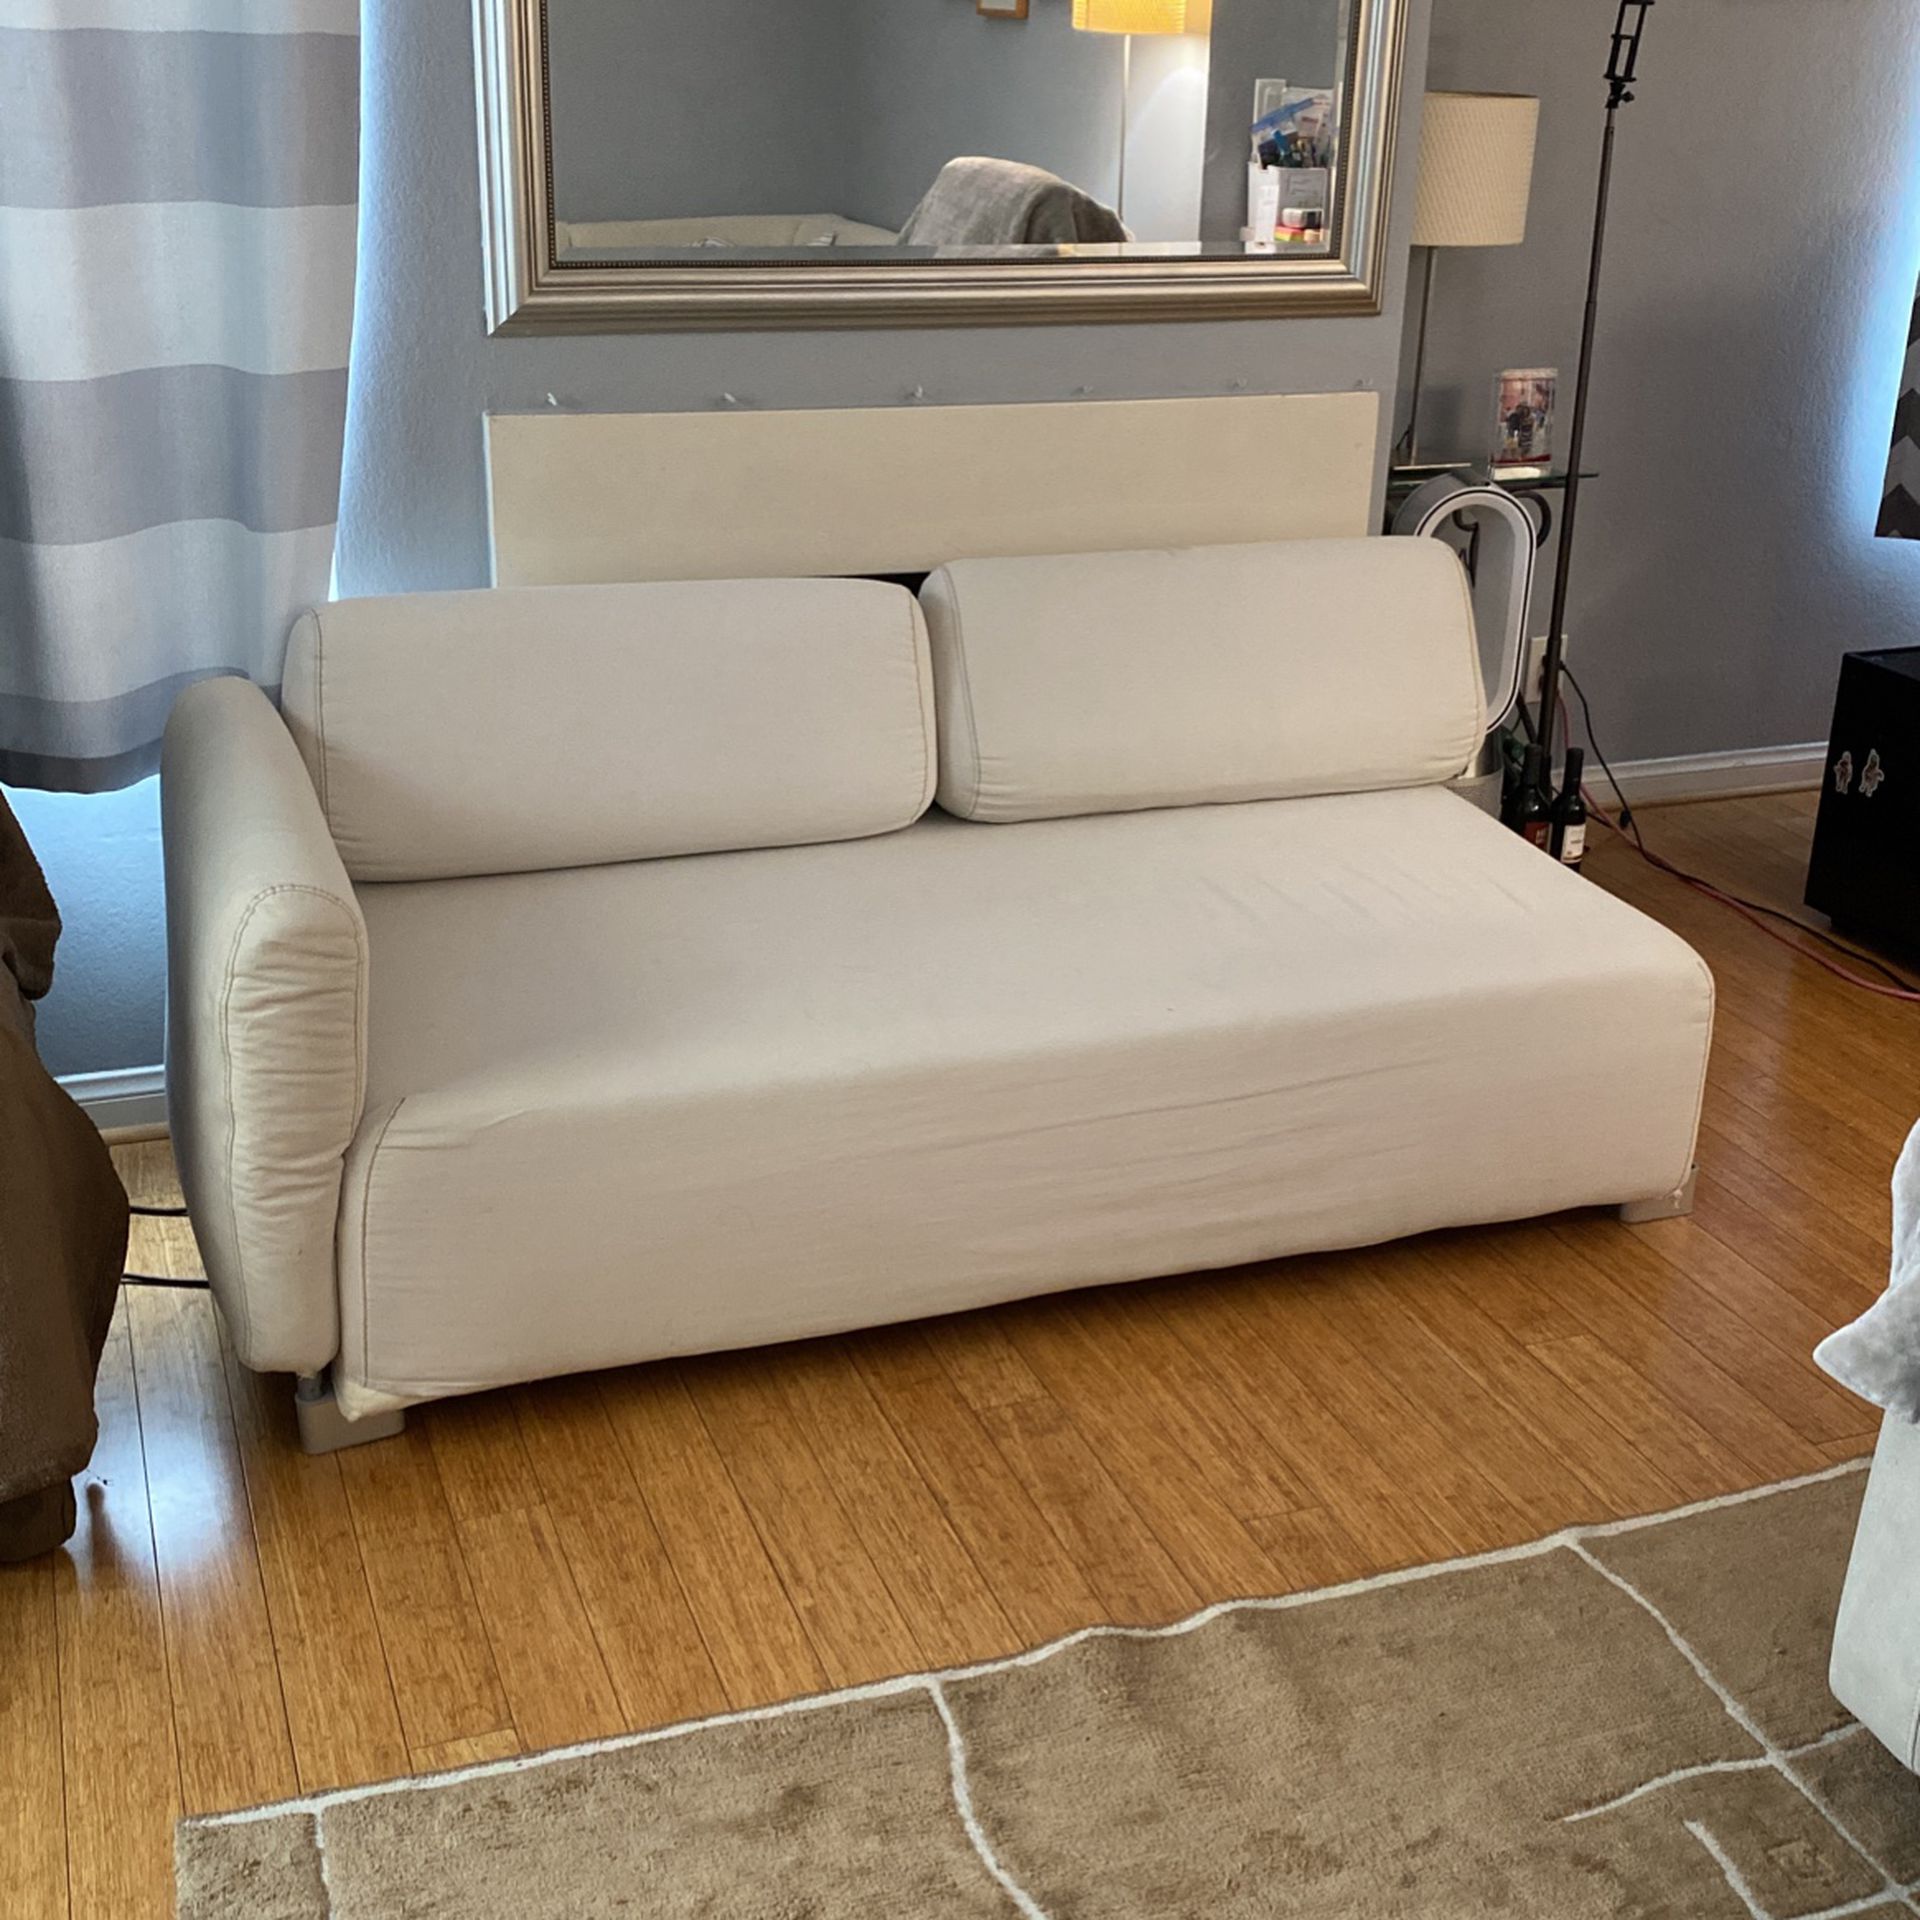 IKEA Couch With Side Table Attachment